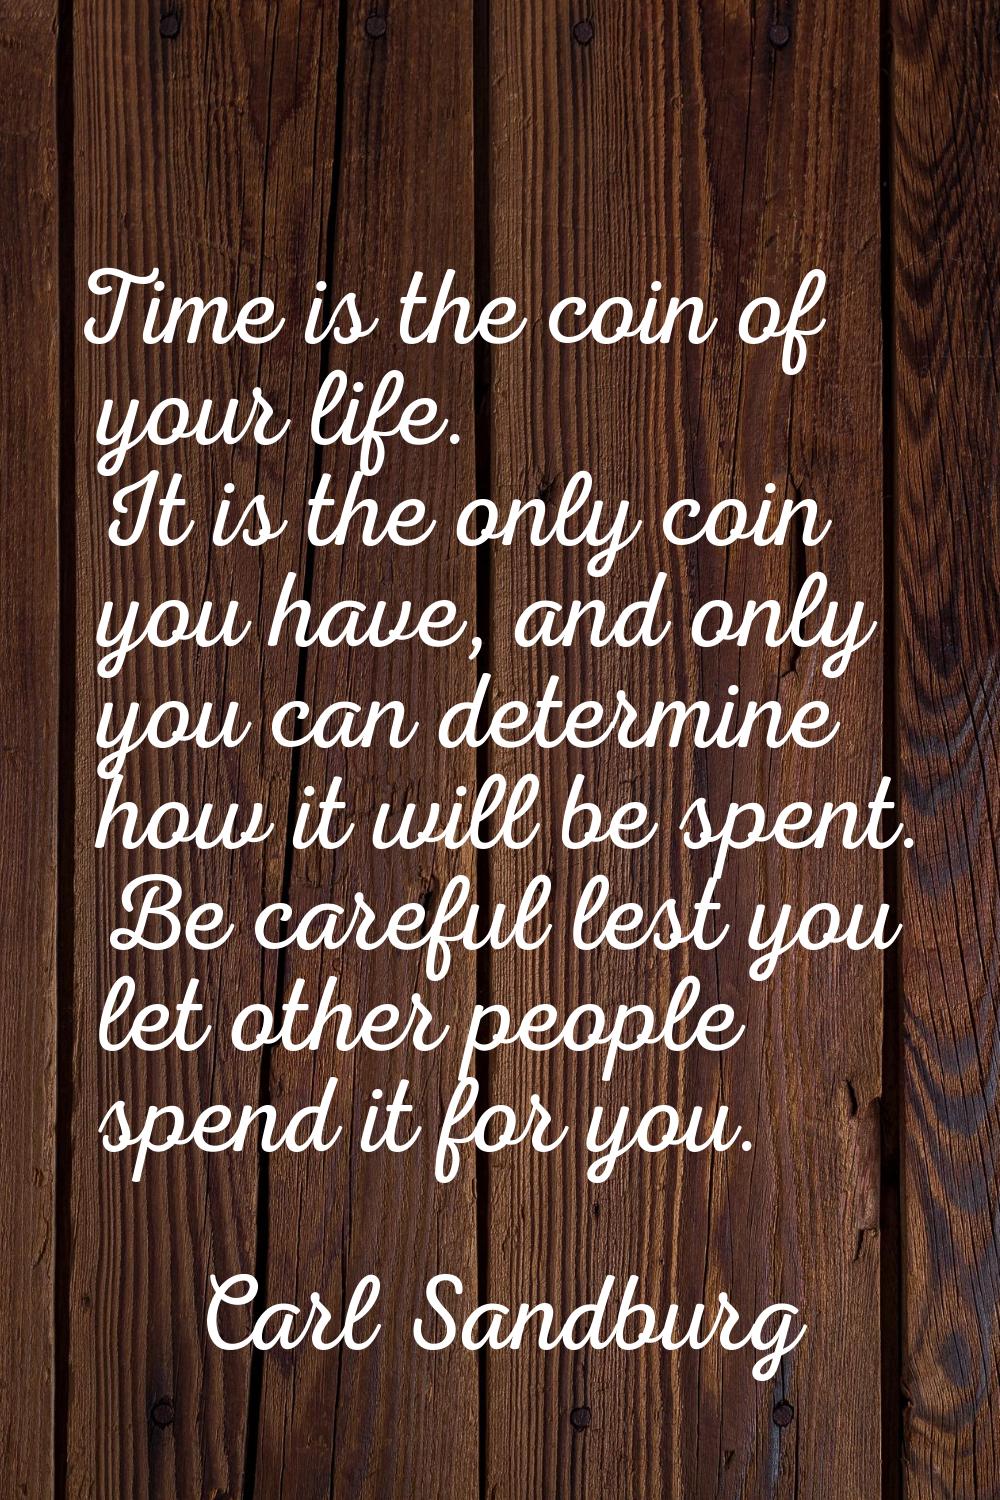 Time is the coin of your life. It is the only coin you have, and only you can determine how it will